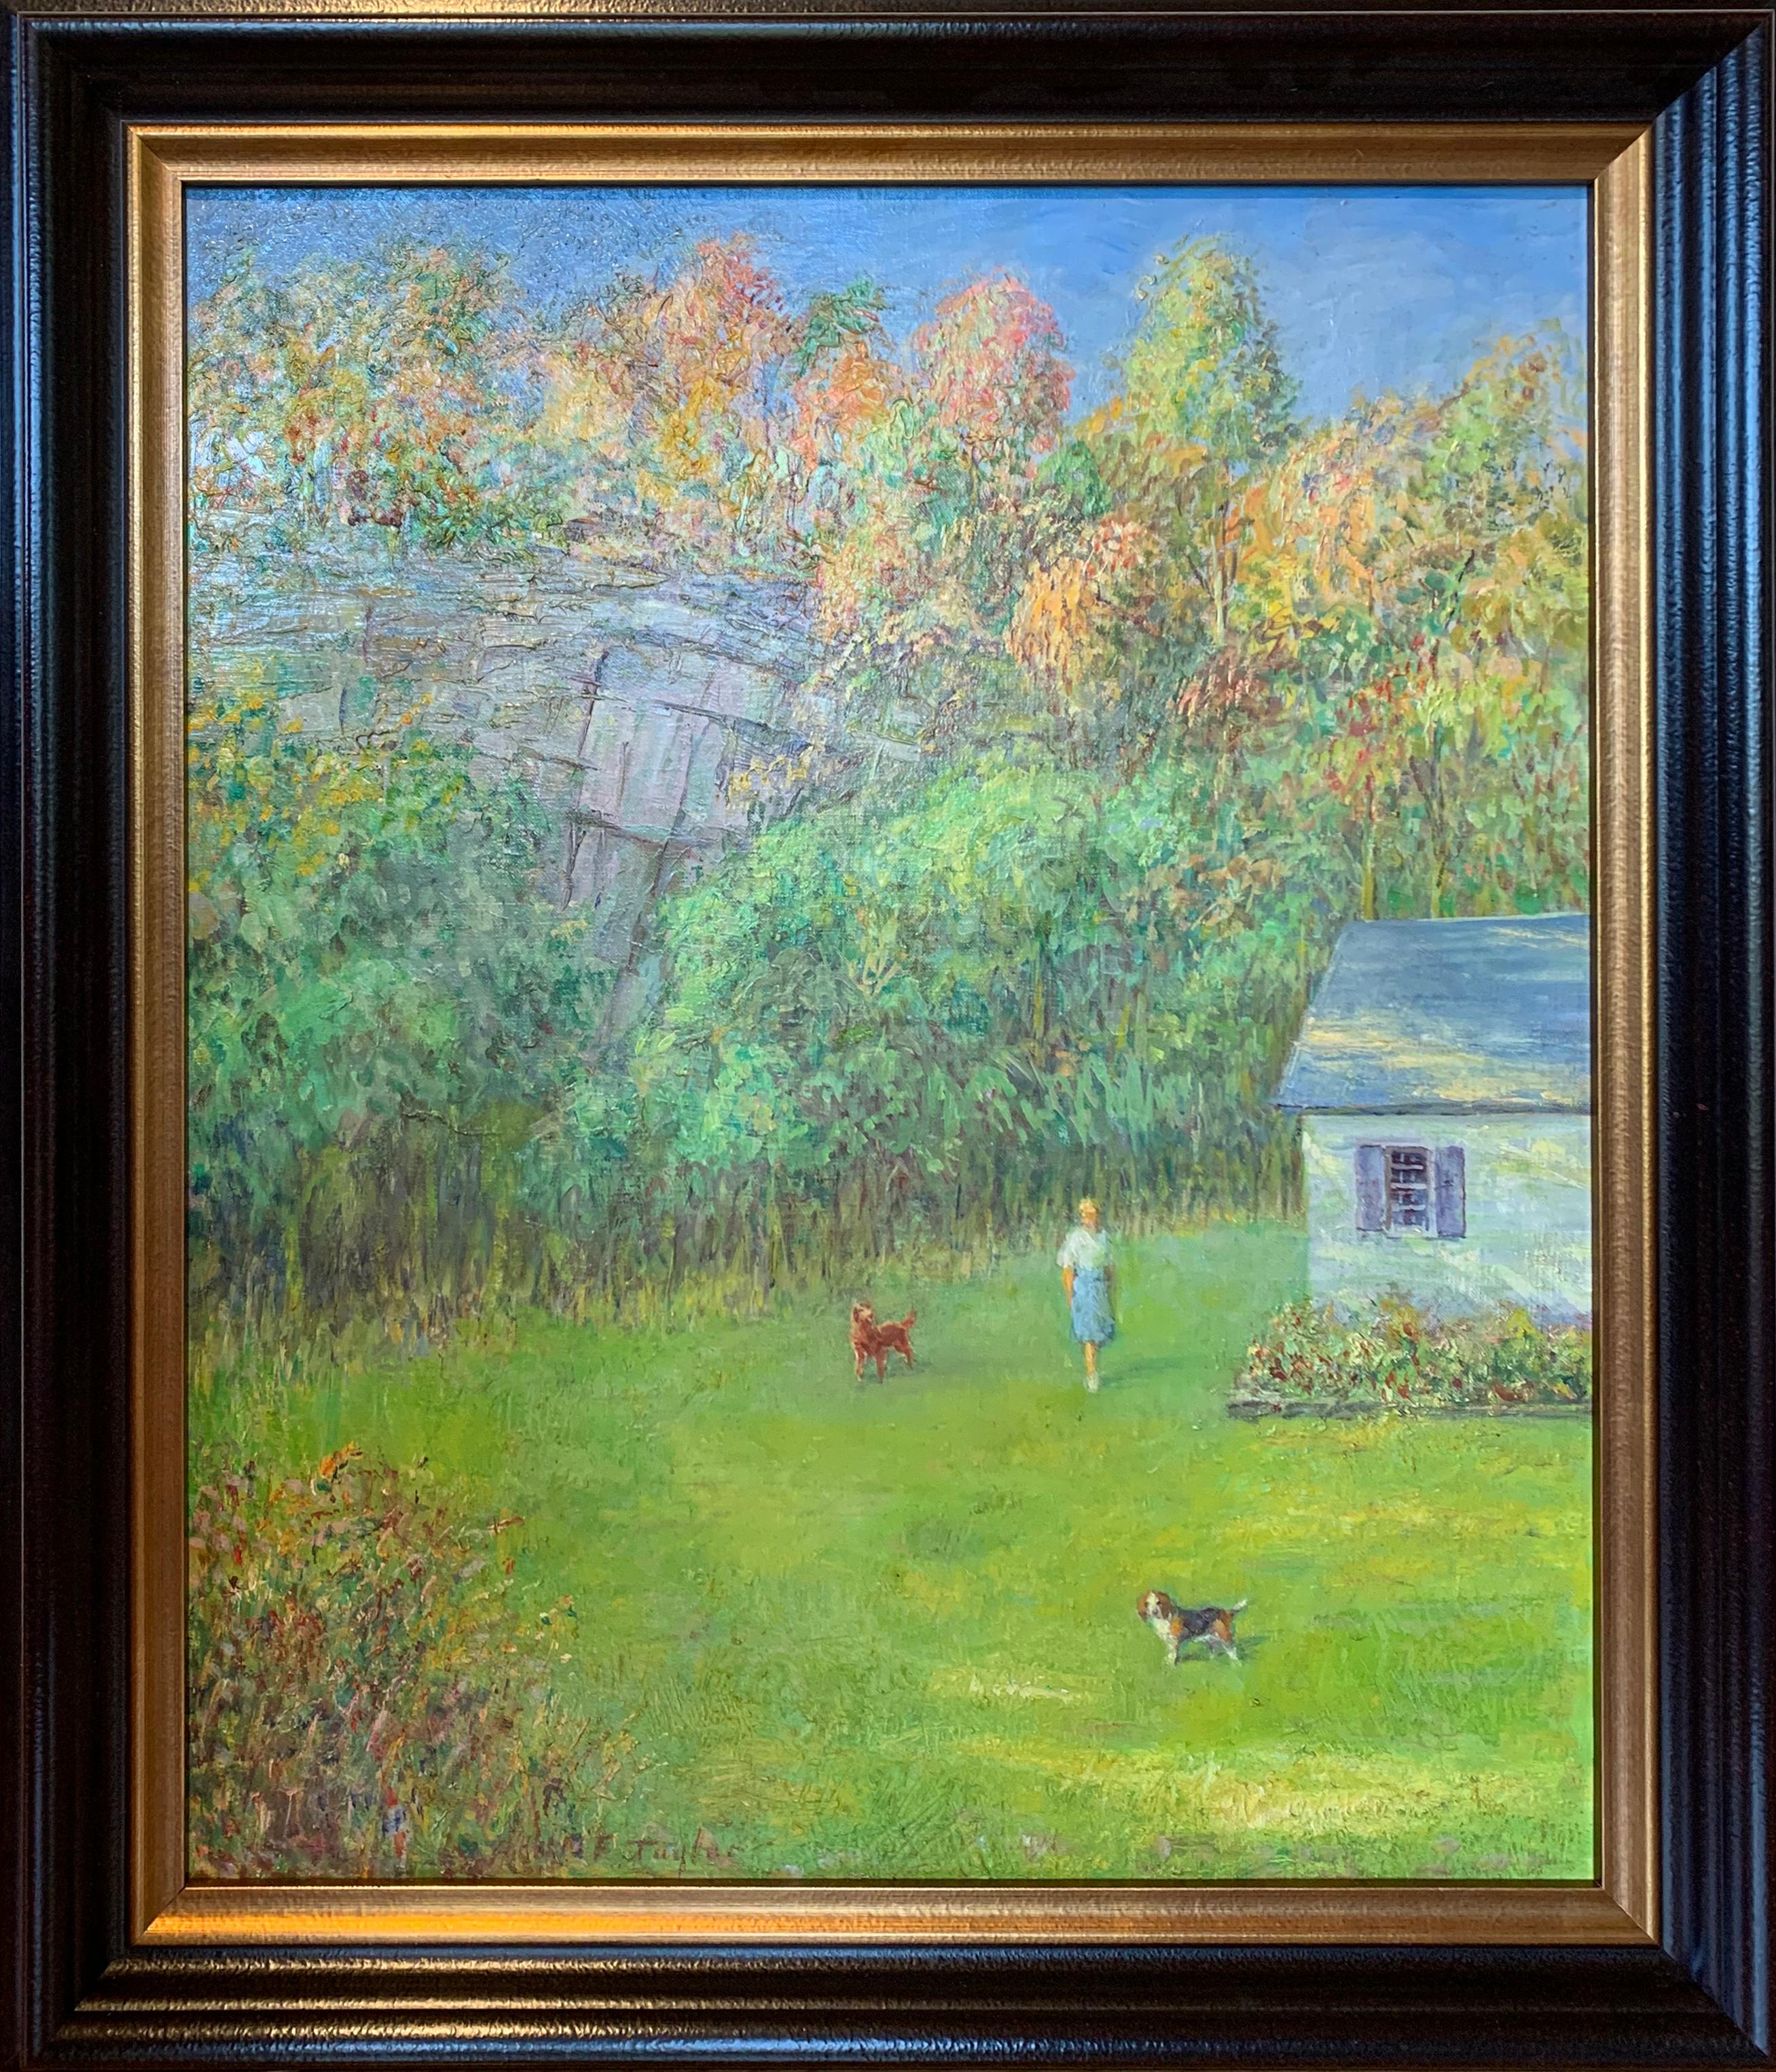 Backyard Scene with Woman and Dogs, Impressionist Landscape of Figure and House